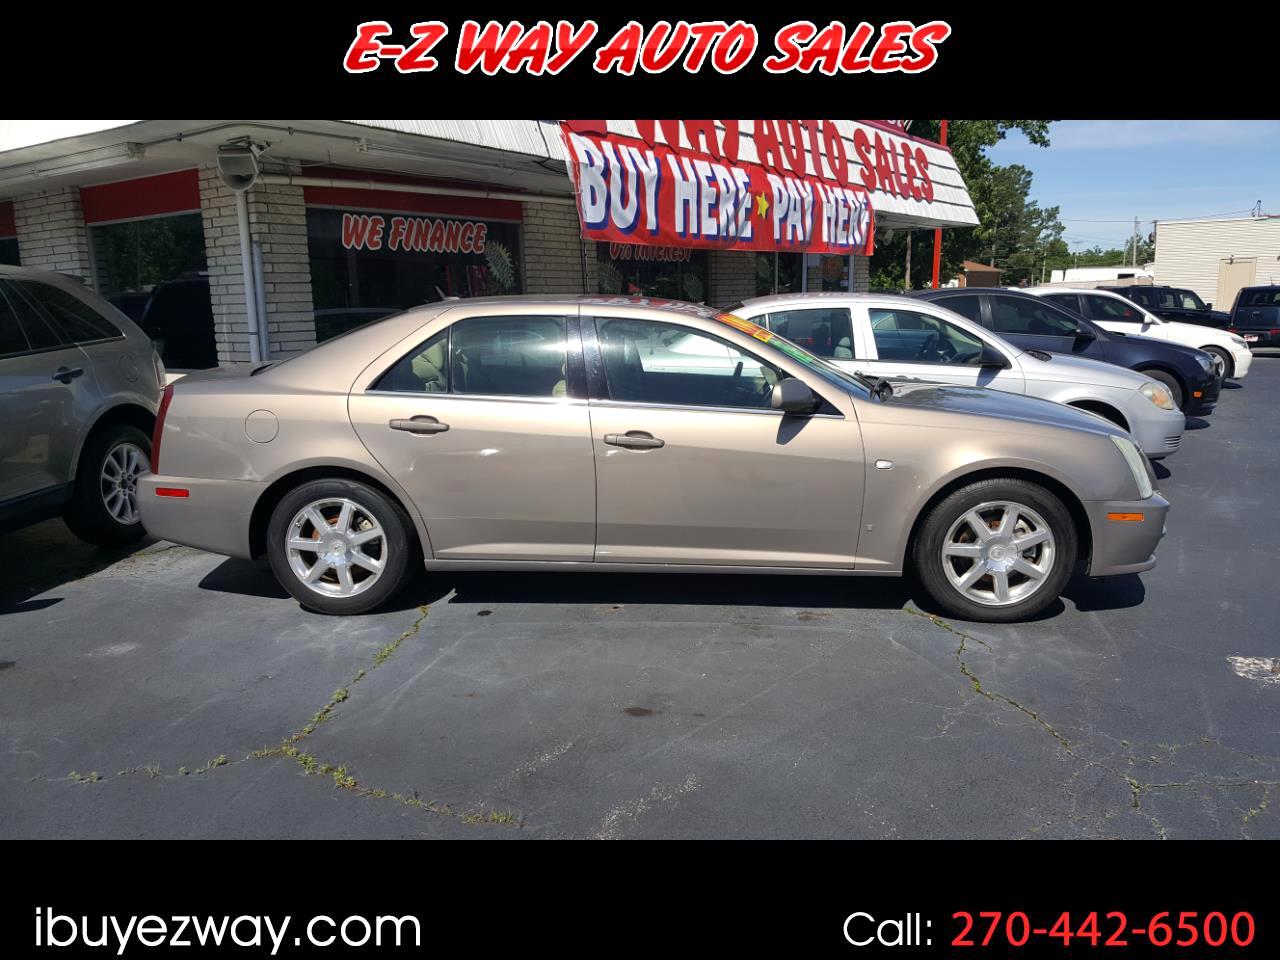 Used Cars For Sale Paducah Ky 42003 E Z Way Auto Sales